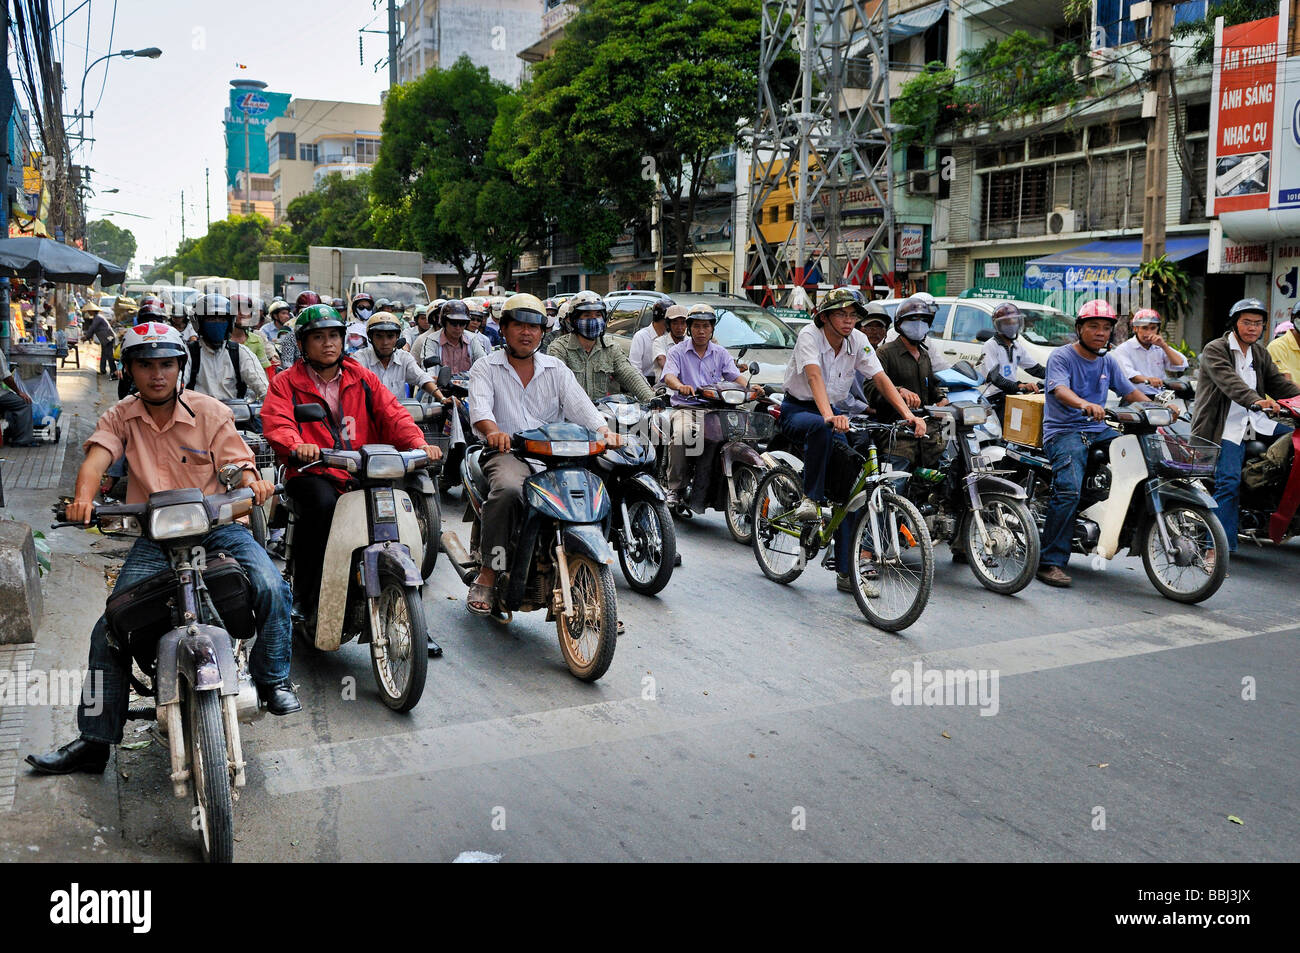 Motorcycles, mopeds in traffic chaos, traffic in Ho Chi Minh City, Saigon, Vietnam, Southeast Asia Stock Photo